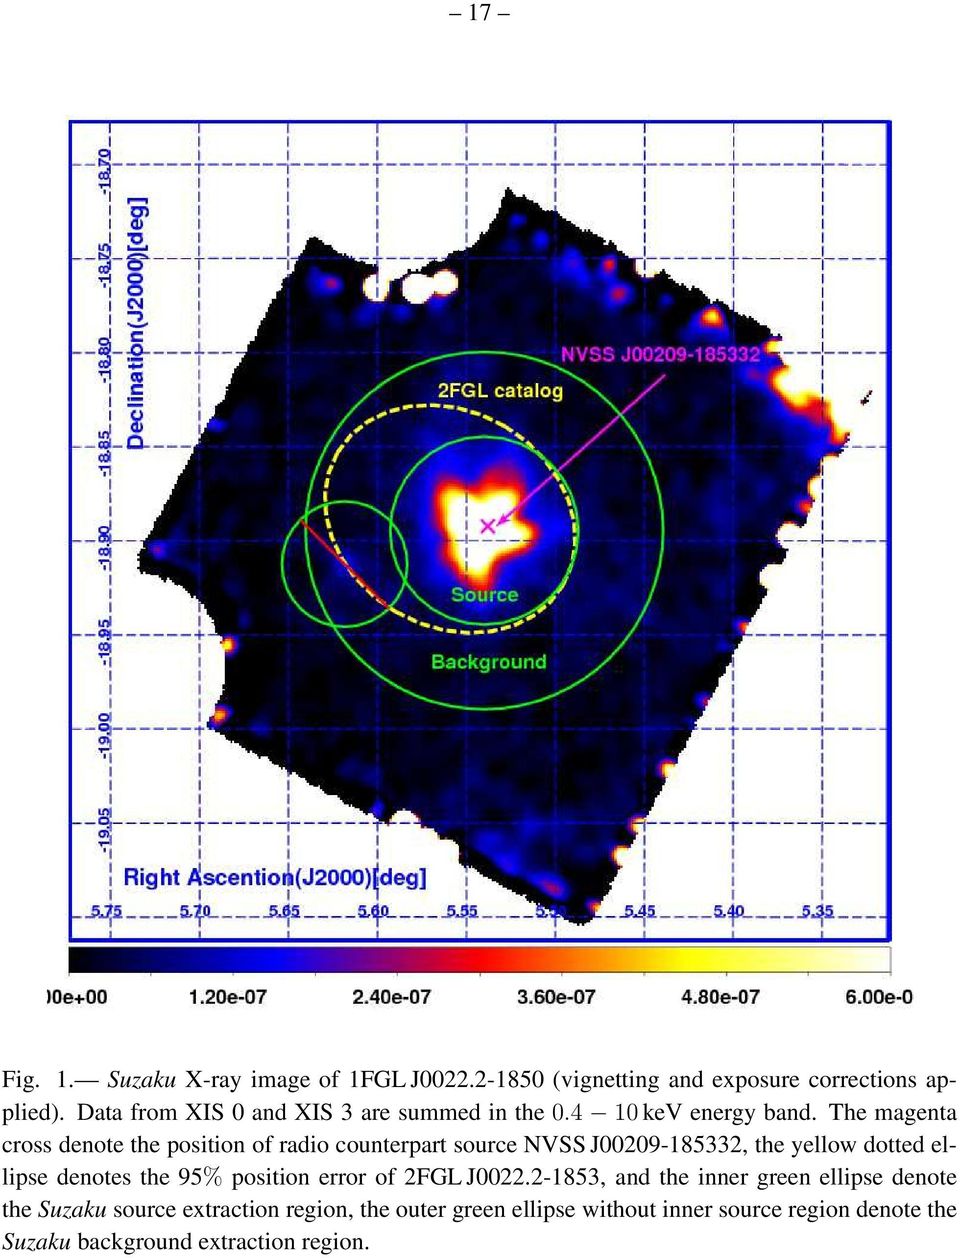 The magenta cross denote the position of radio counterpart source NVSS J002082, the yellow dotted ellipse denotes the %